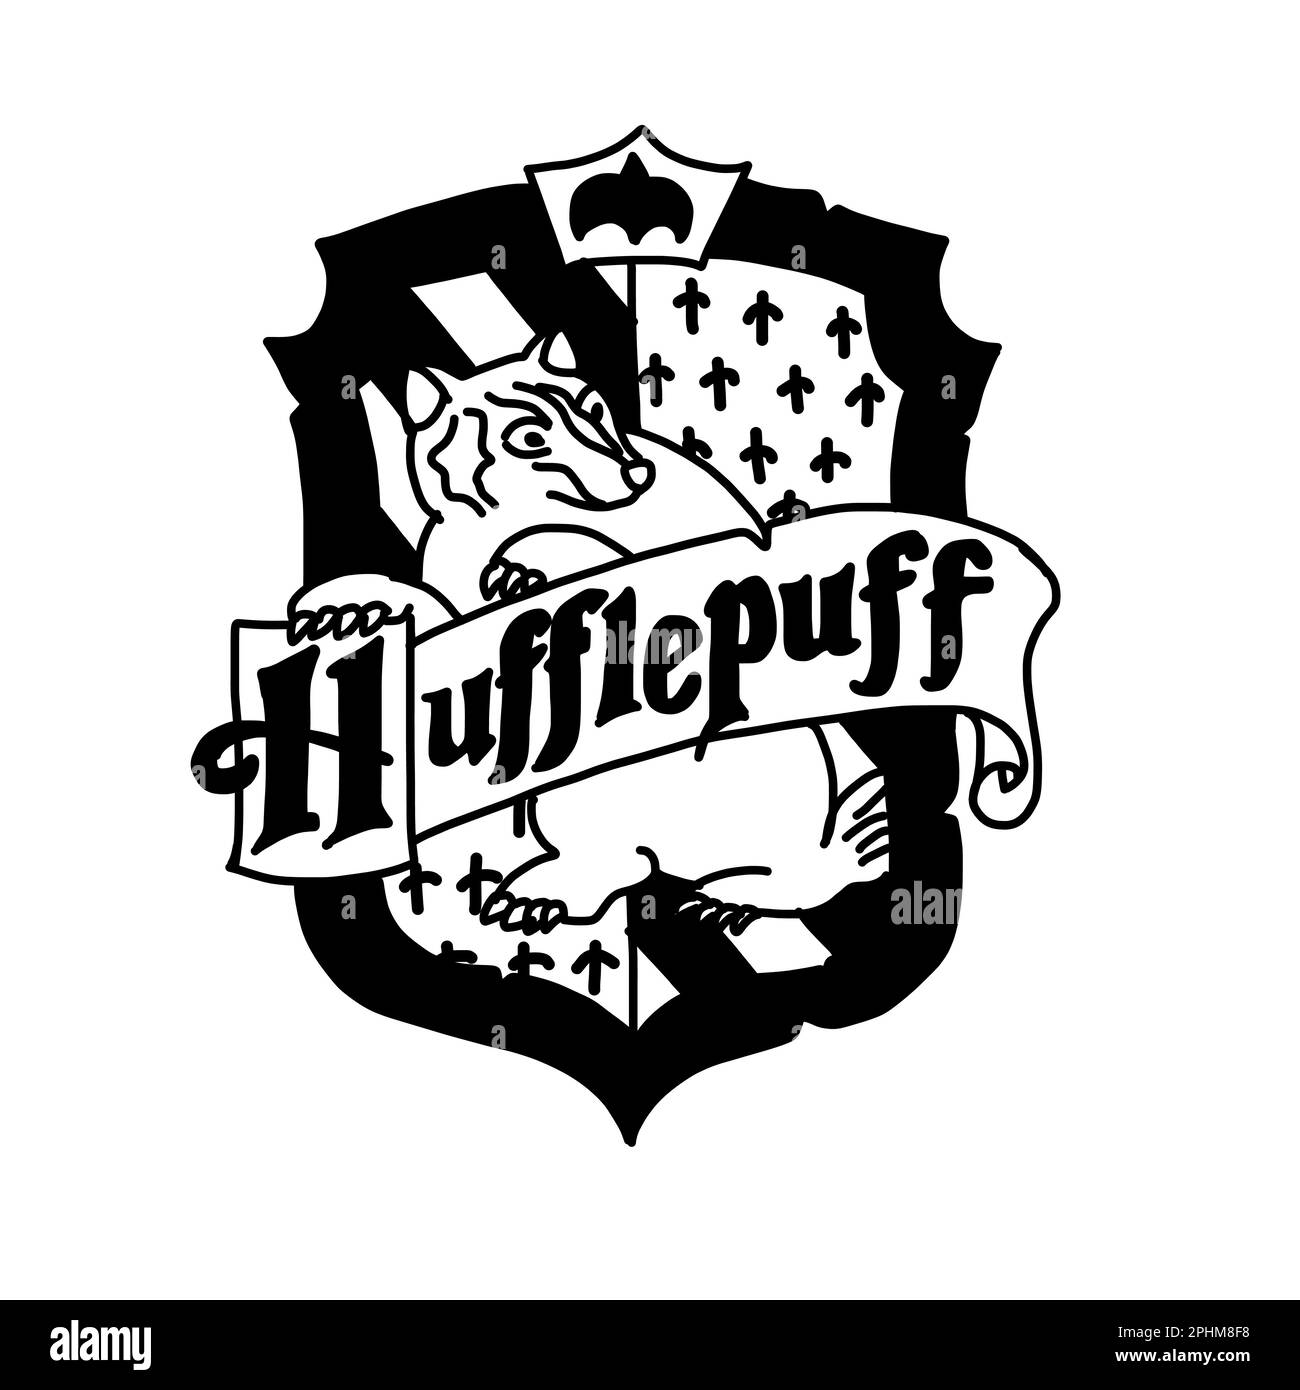 Harry Potter Hufflepuff logo in cartoon doodle style. Vector illustration isolated on white background. Stock Vector